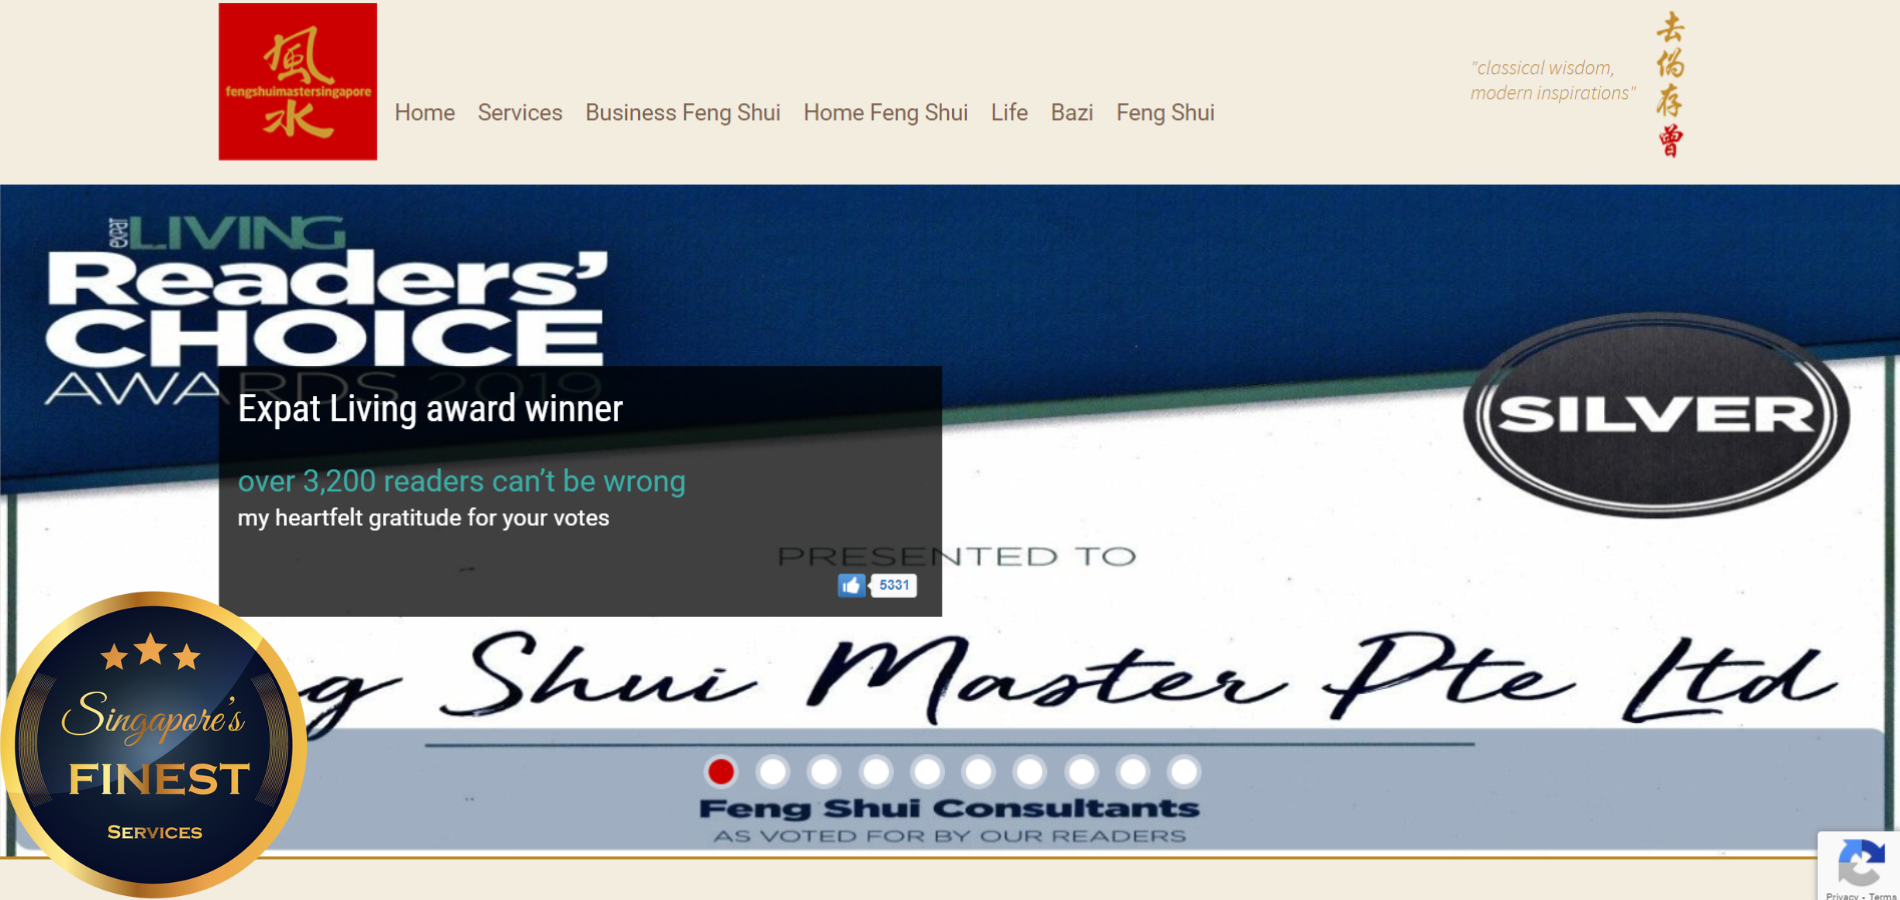 The Finest Fengshui Masters in Singapore